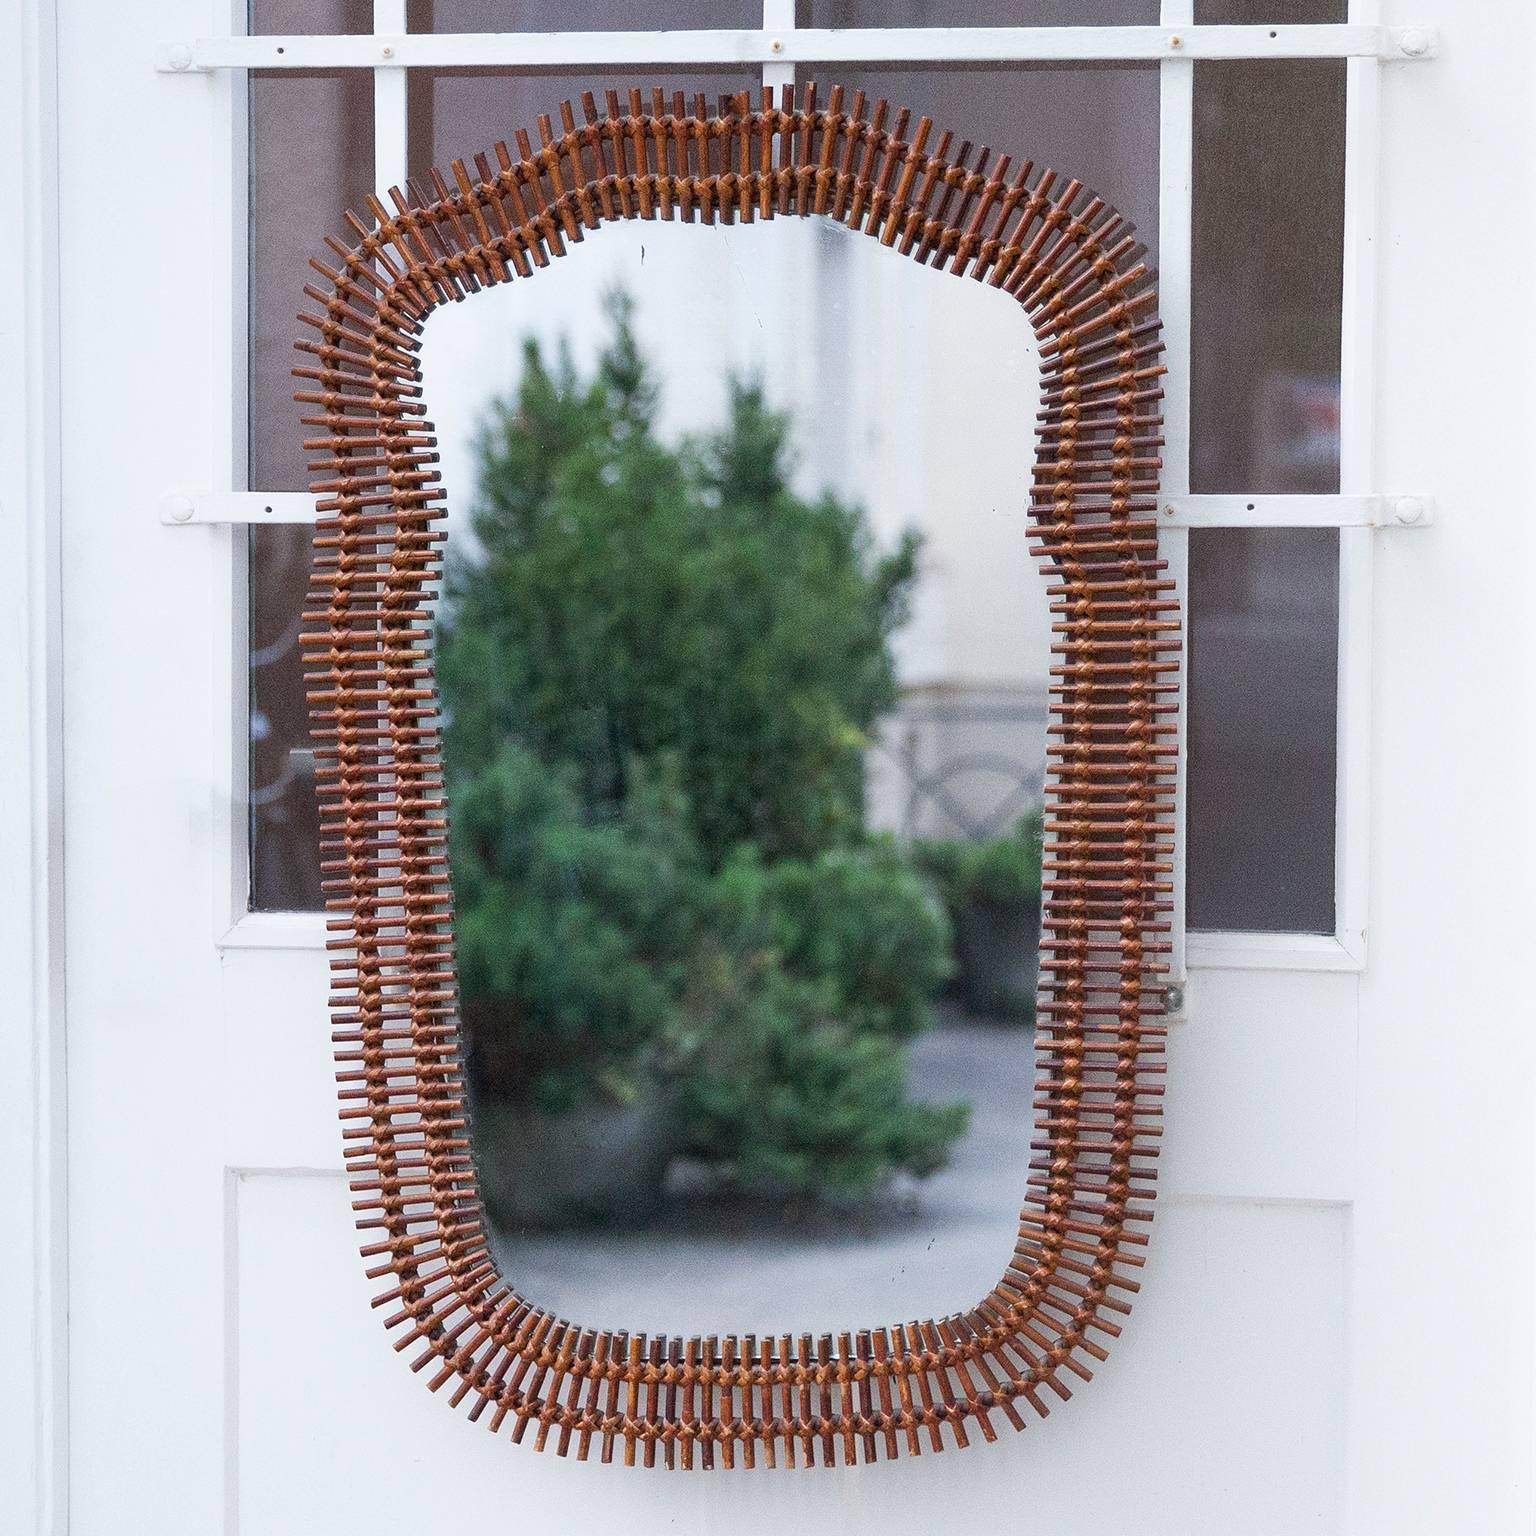 Vintage bamboo mirror in asymmetrical shape attributed to Franco Albini, Italy 1950s.
Measures: H 93.5 x W 58 x D 2 cm.